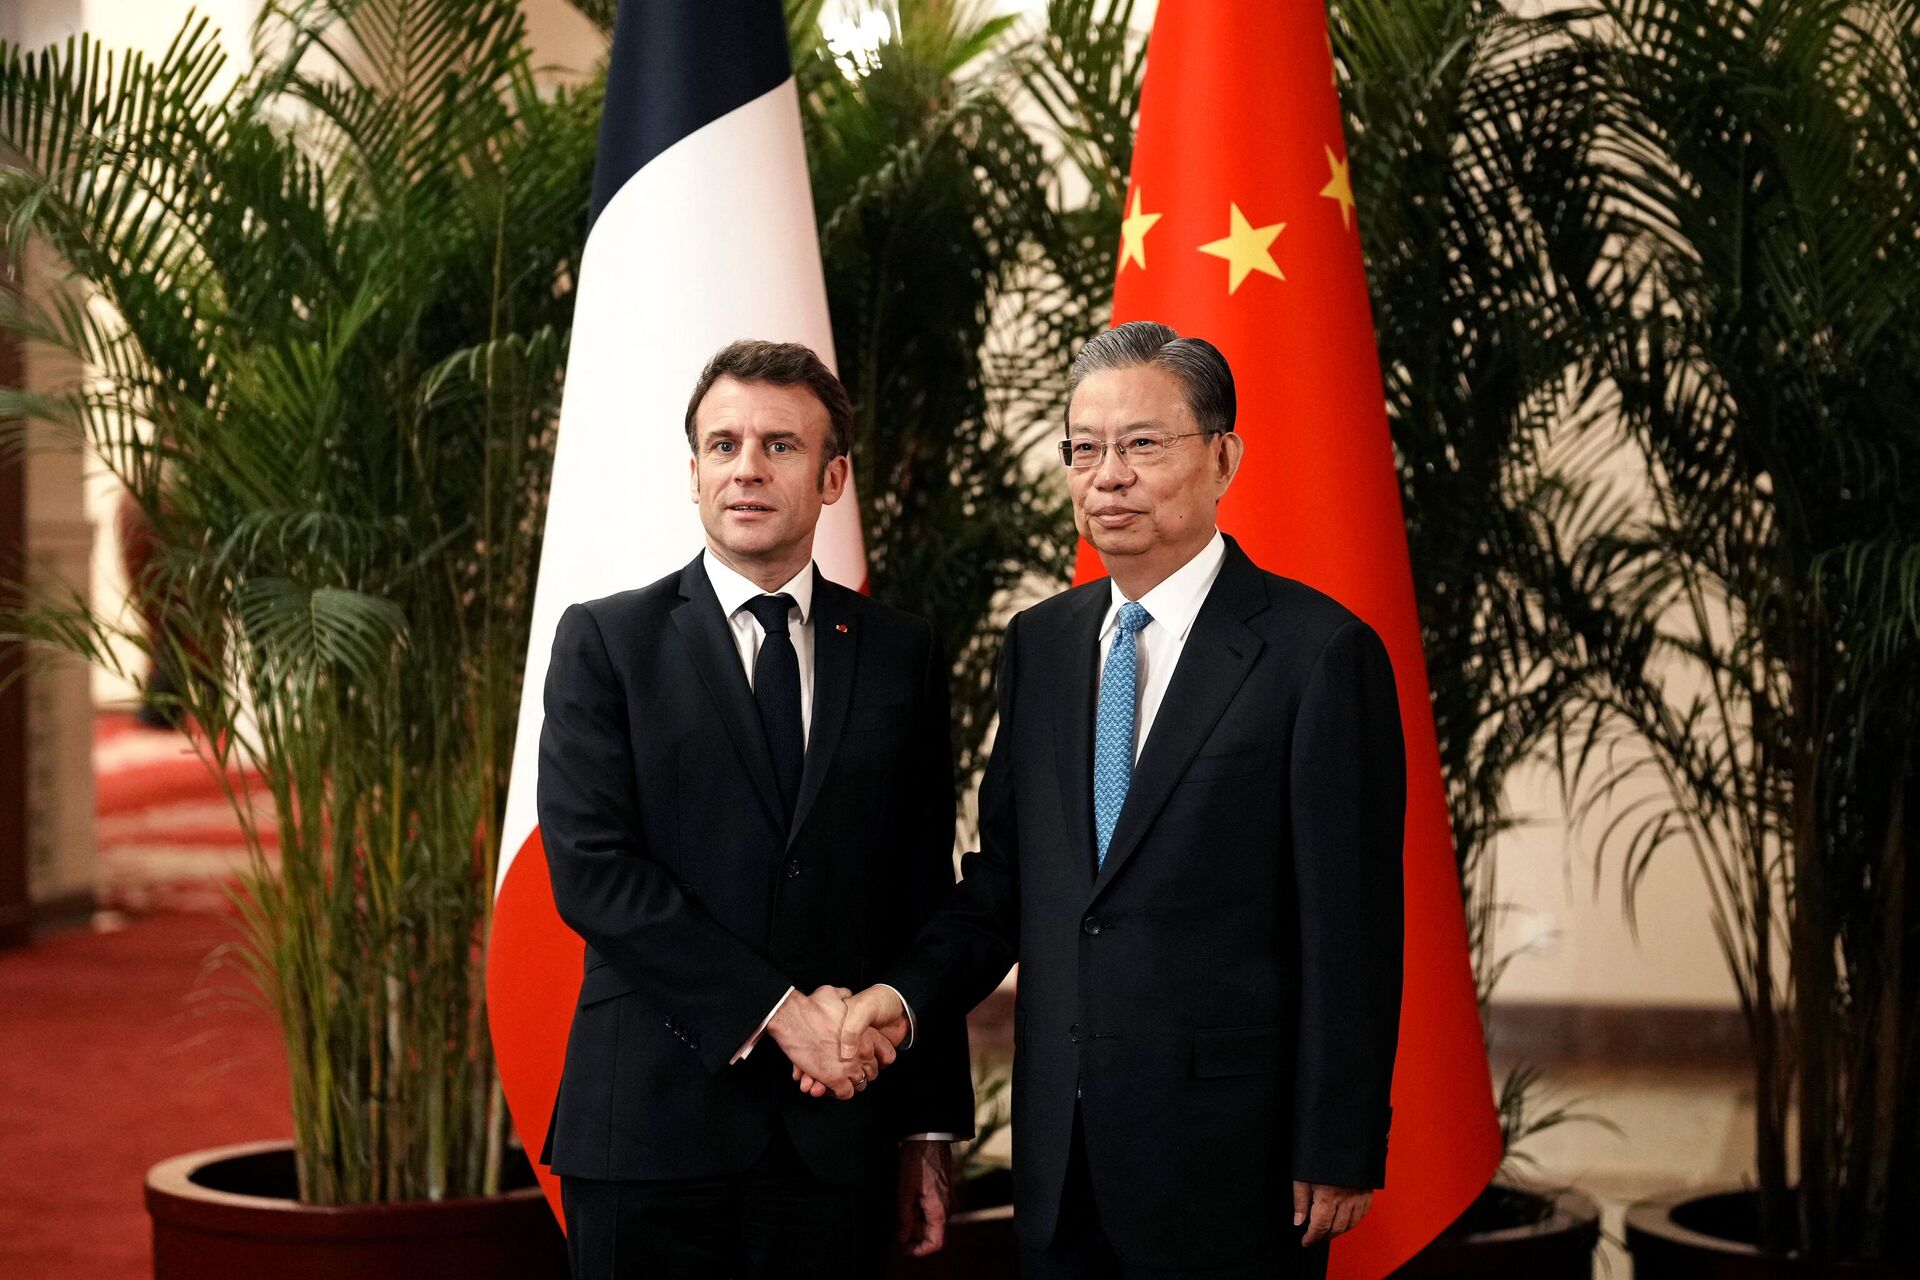 China's National People's Congress Chairman Zhao Leji (R) shakes hands with French President Emmanuel Macron prior to their meeting at the Great Hall of the People in Beijing on April 6, 2023 - Sputnik International, 1920, 06.04.2023